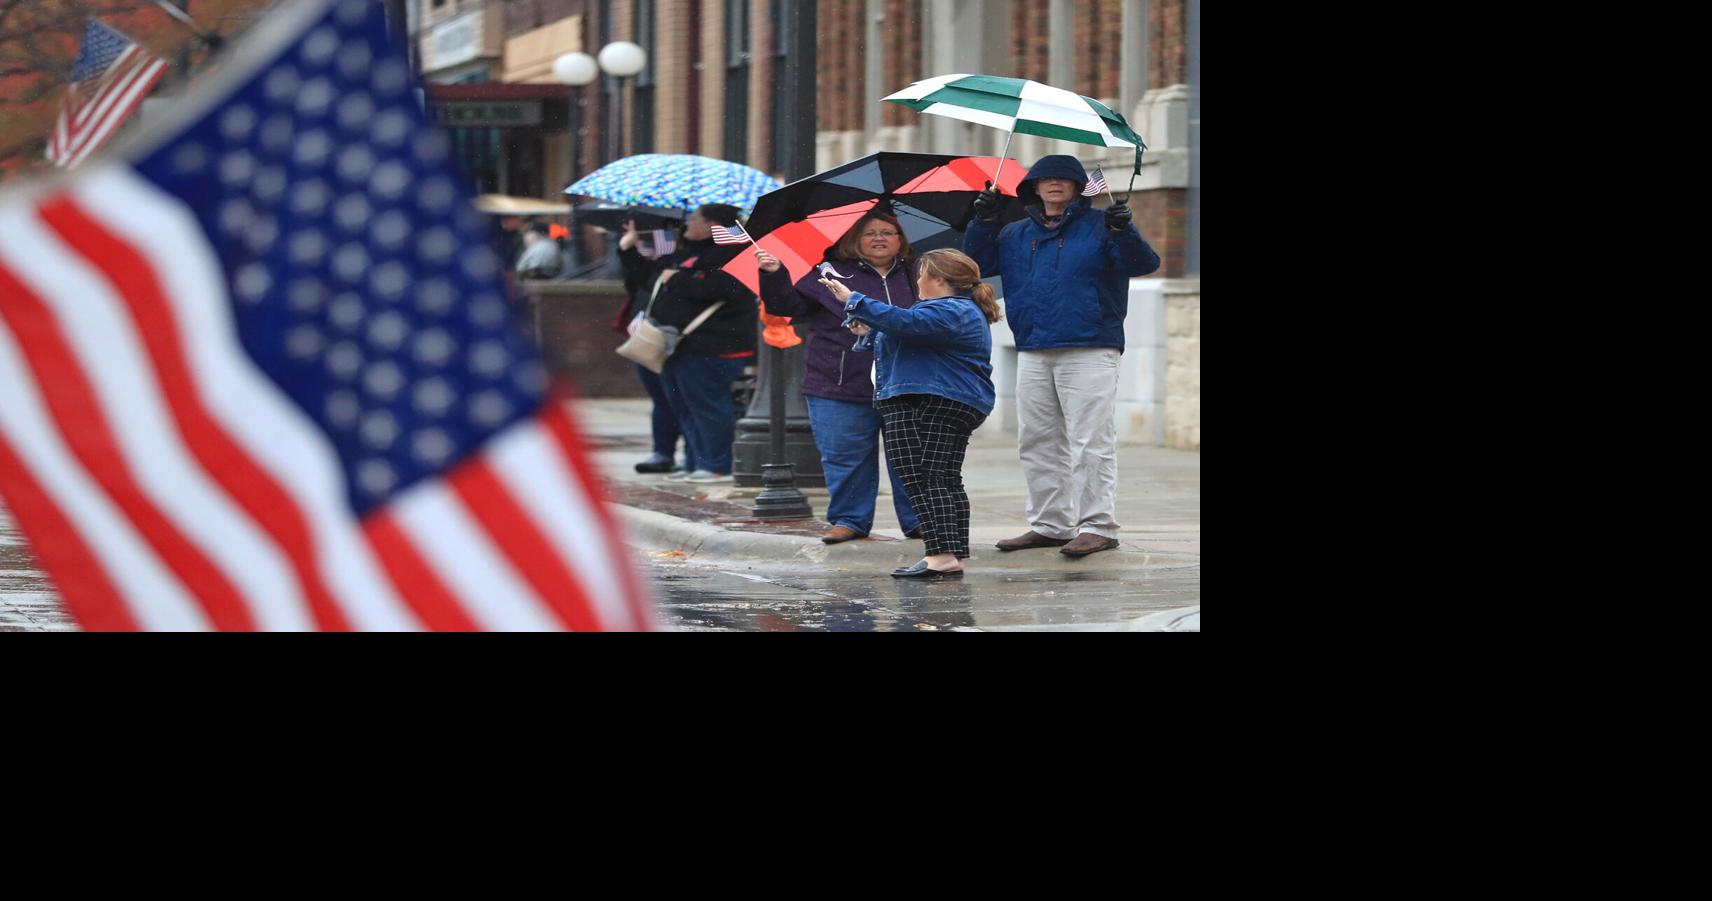 The Council Bluffs Veterans Day Parade must go on — rain or shine